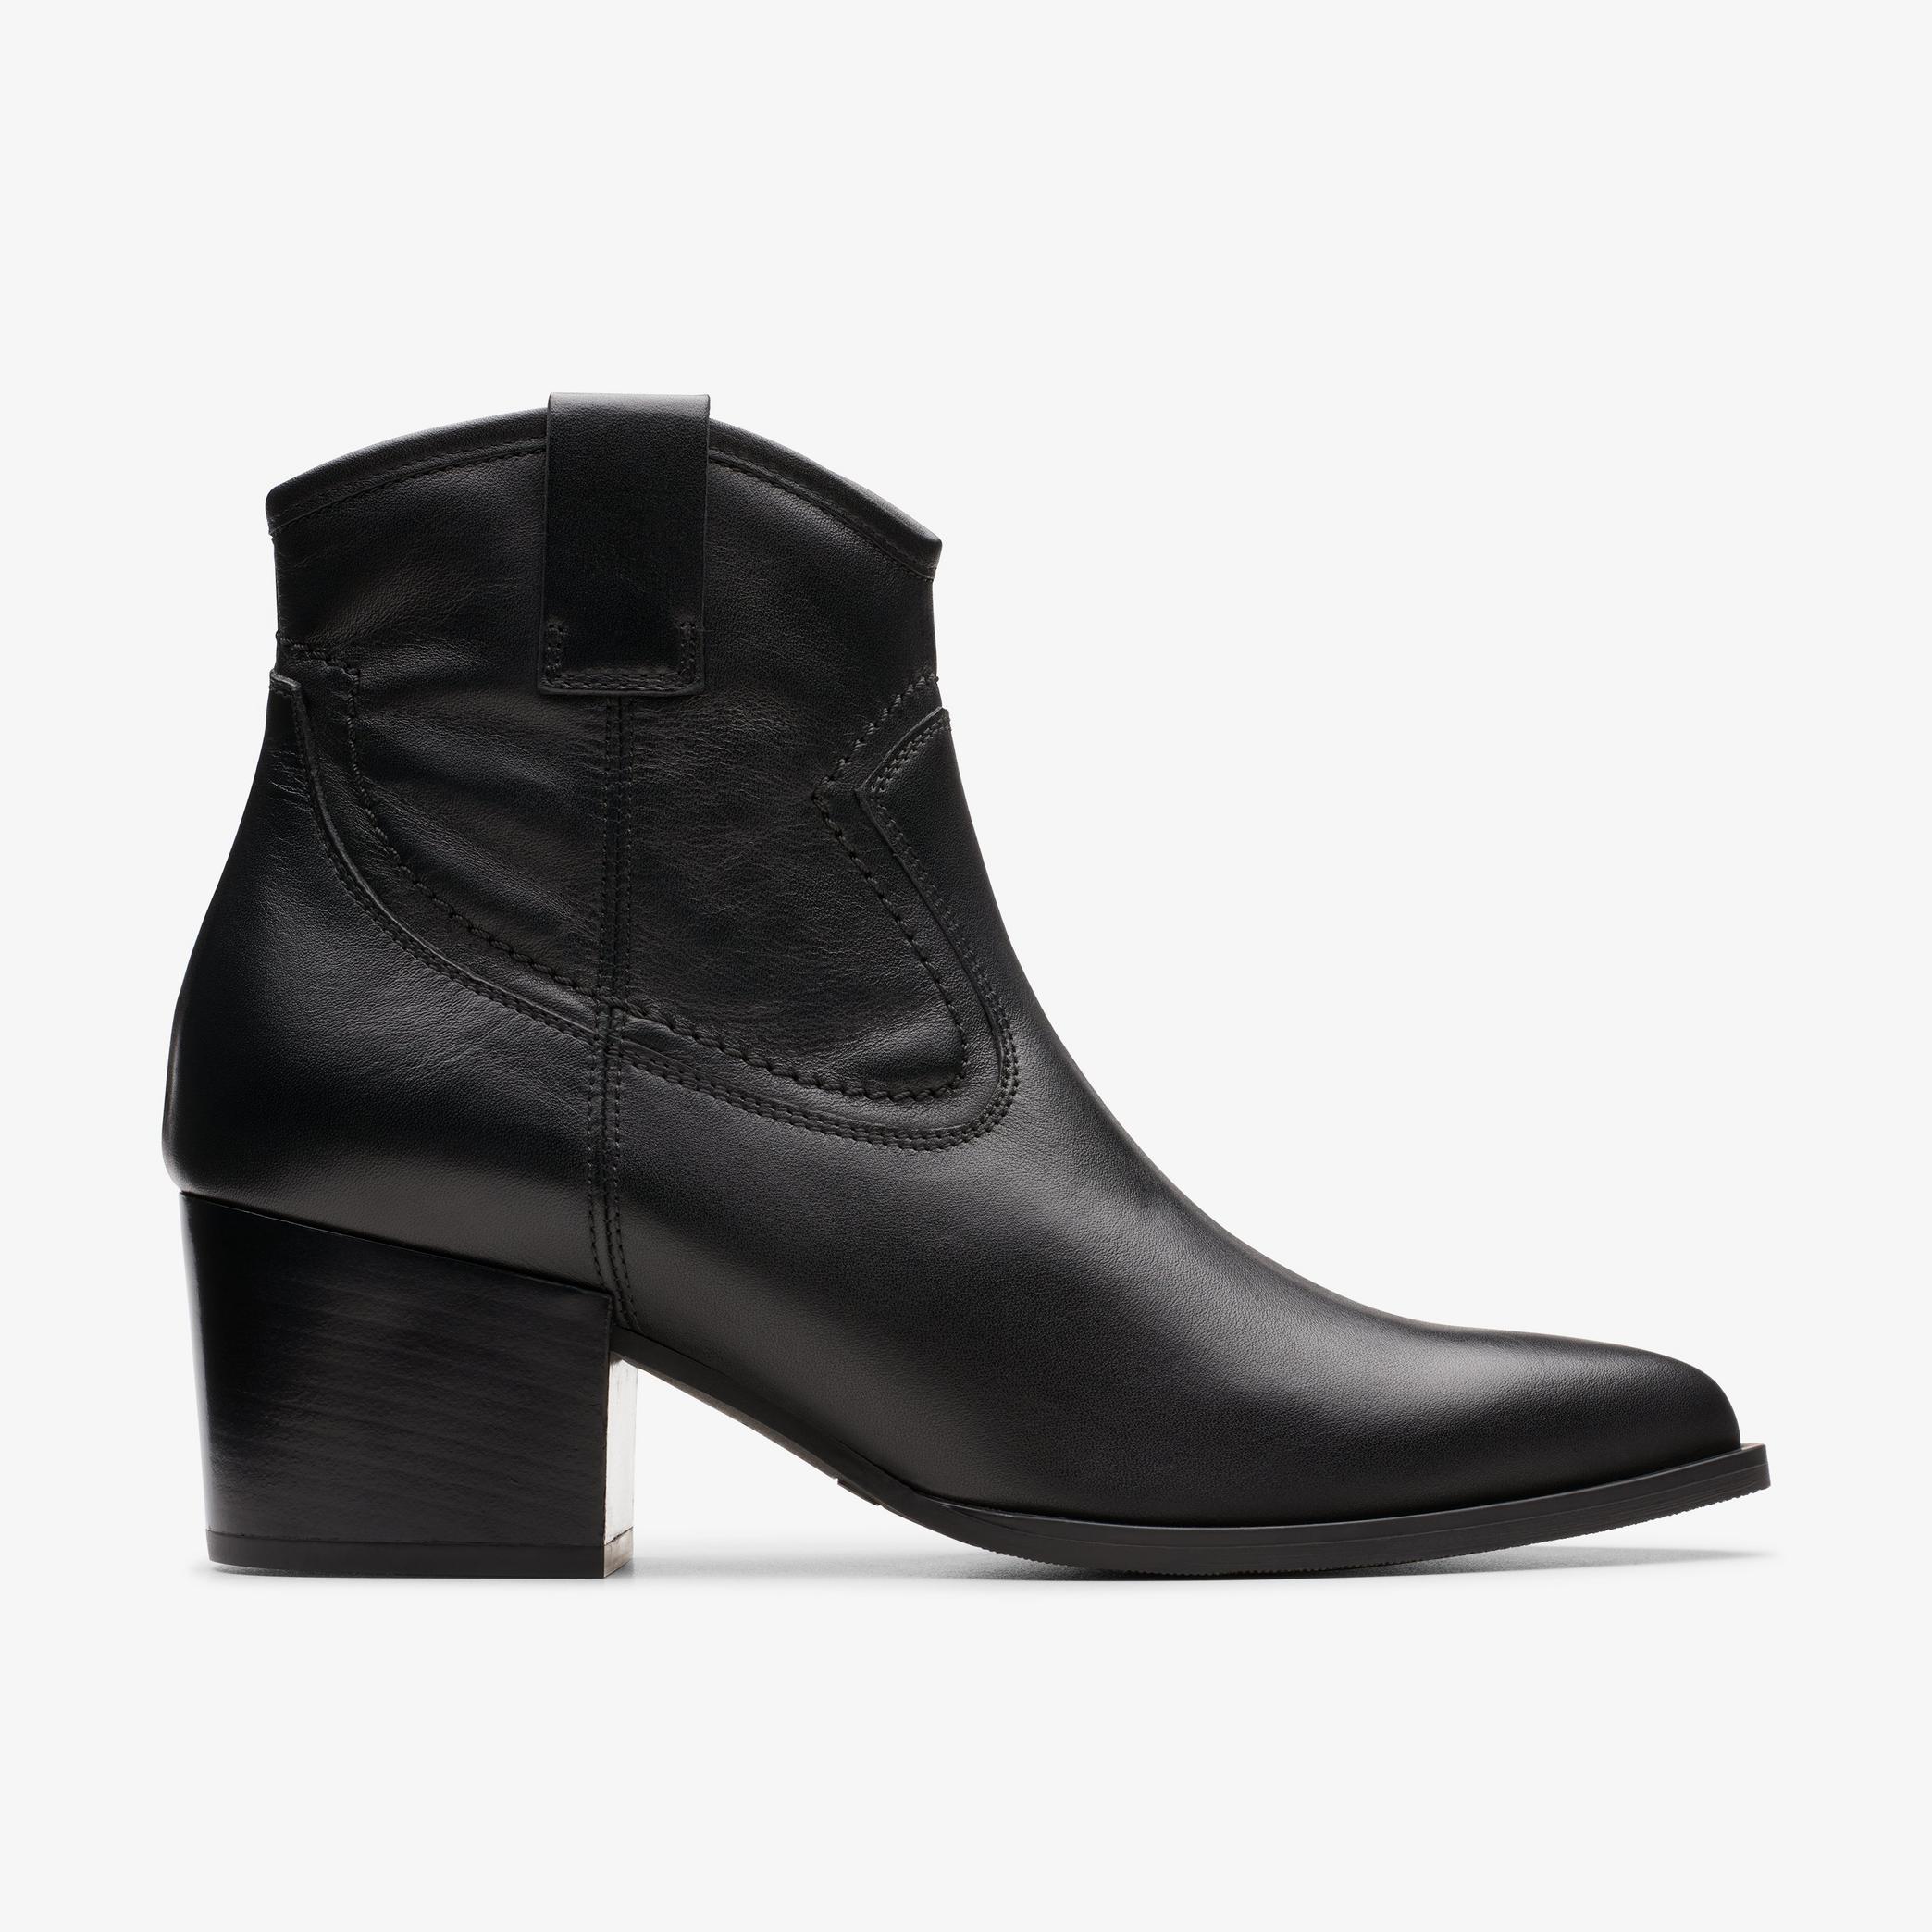 Elder Rae Black Ankle Boots, view 1 of 6